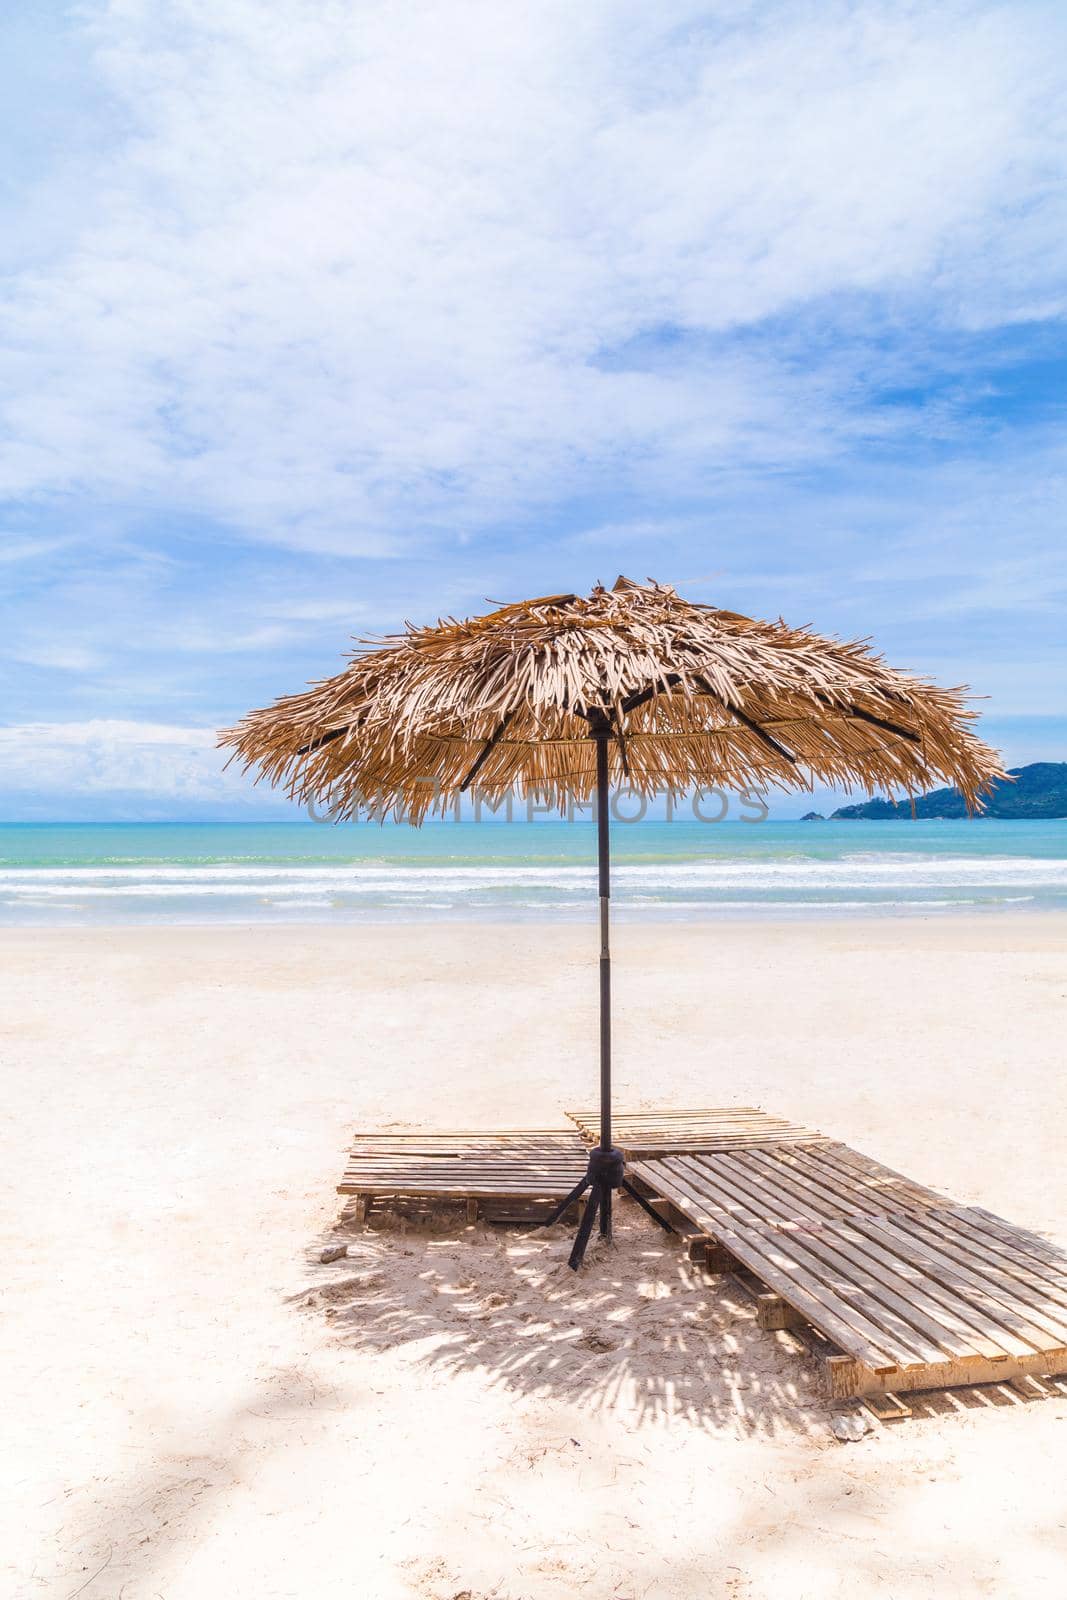 Beach Umbrella made of palm leafs on a perfect white beach in front of Sea in Phuket Isaland, Thailand.